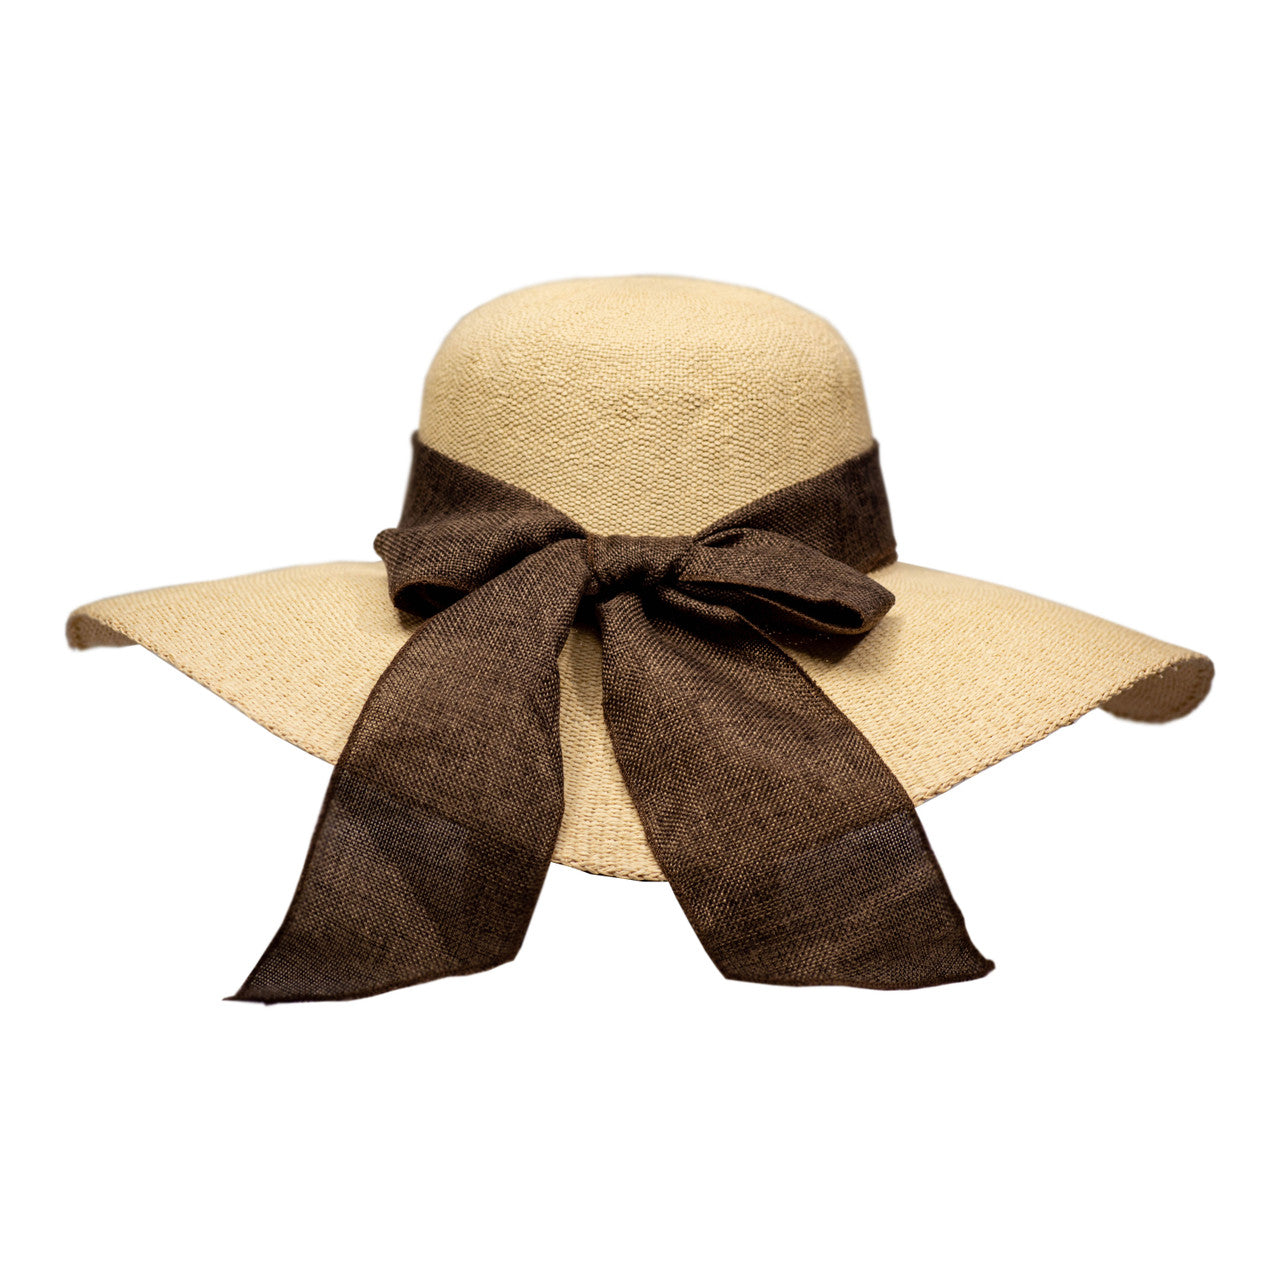 Saint Martin - Wide Brim Hat with Bow (Profile Back)